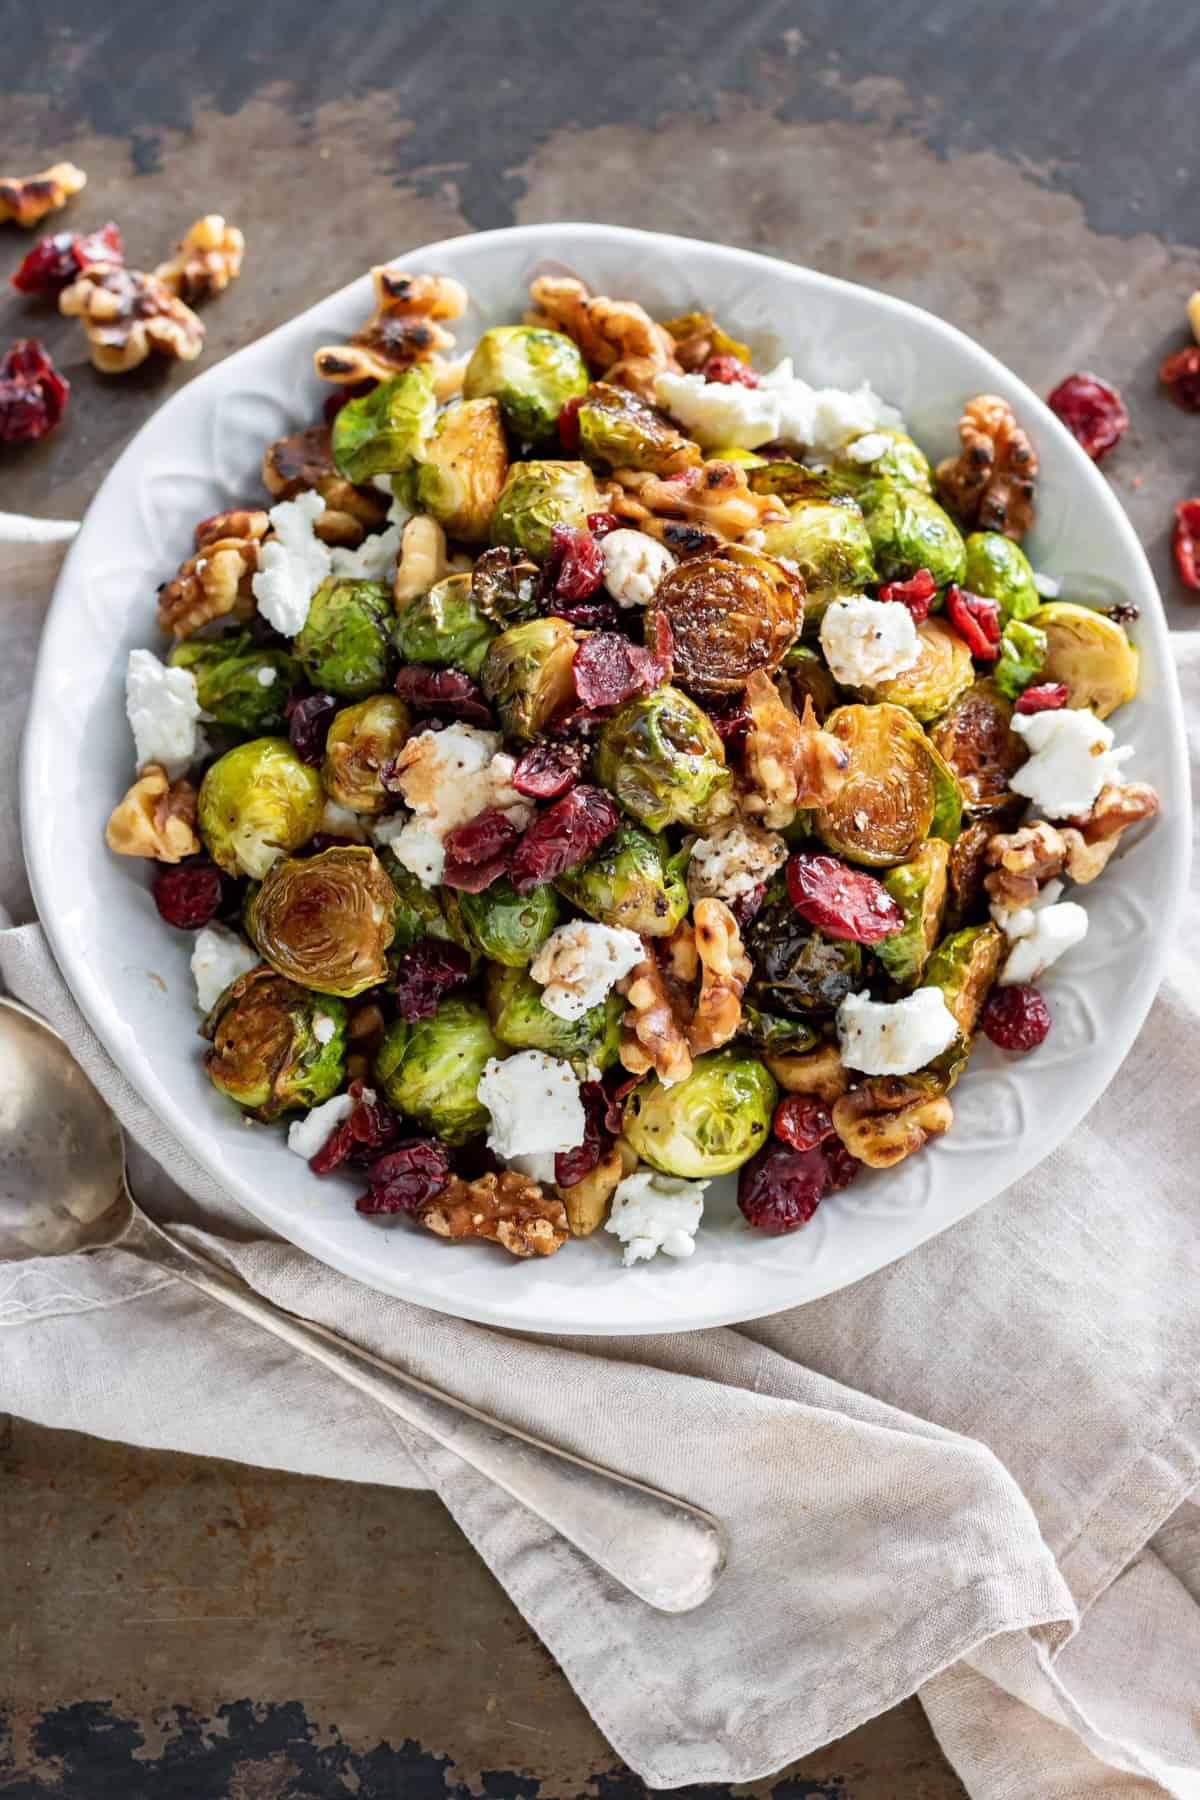 Table with a dish of roasted sprouts.